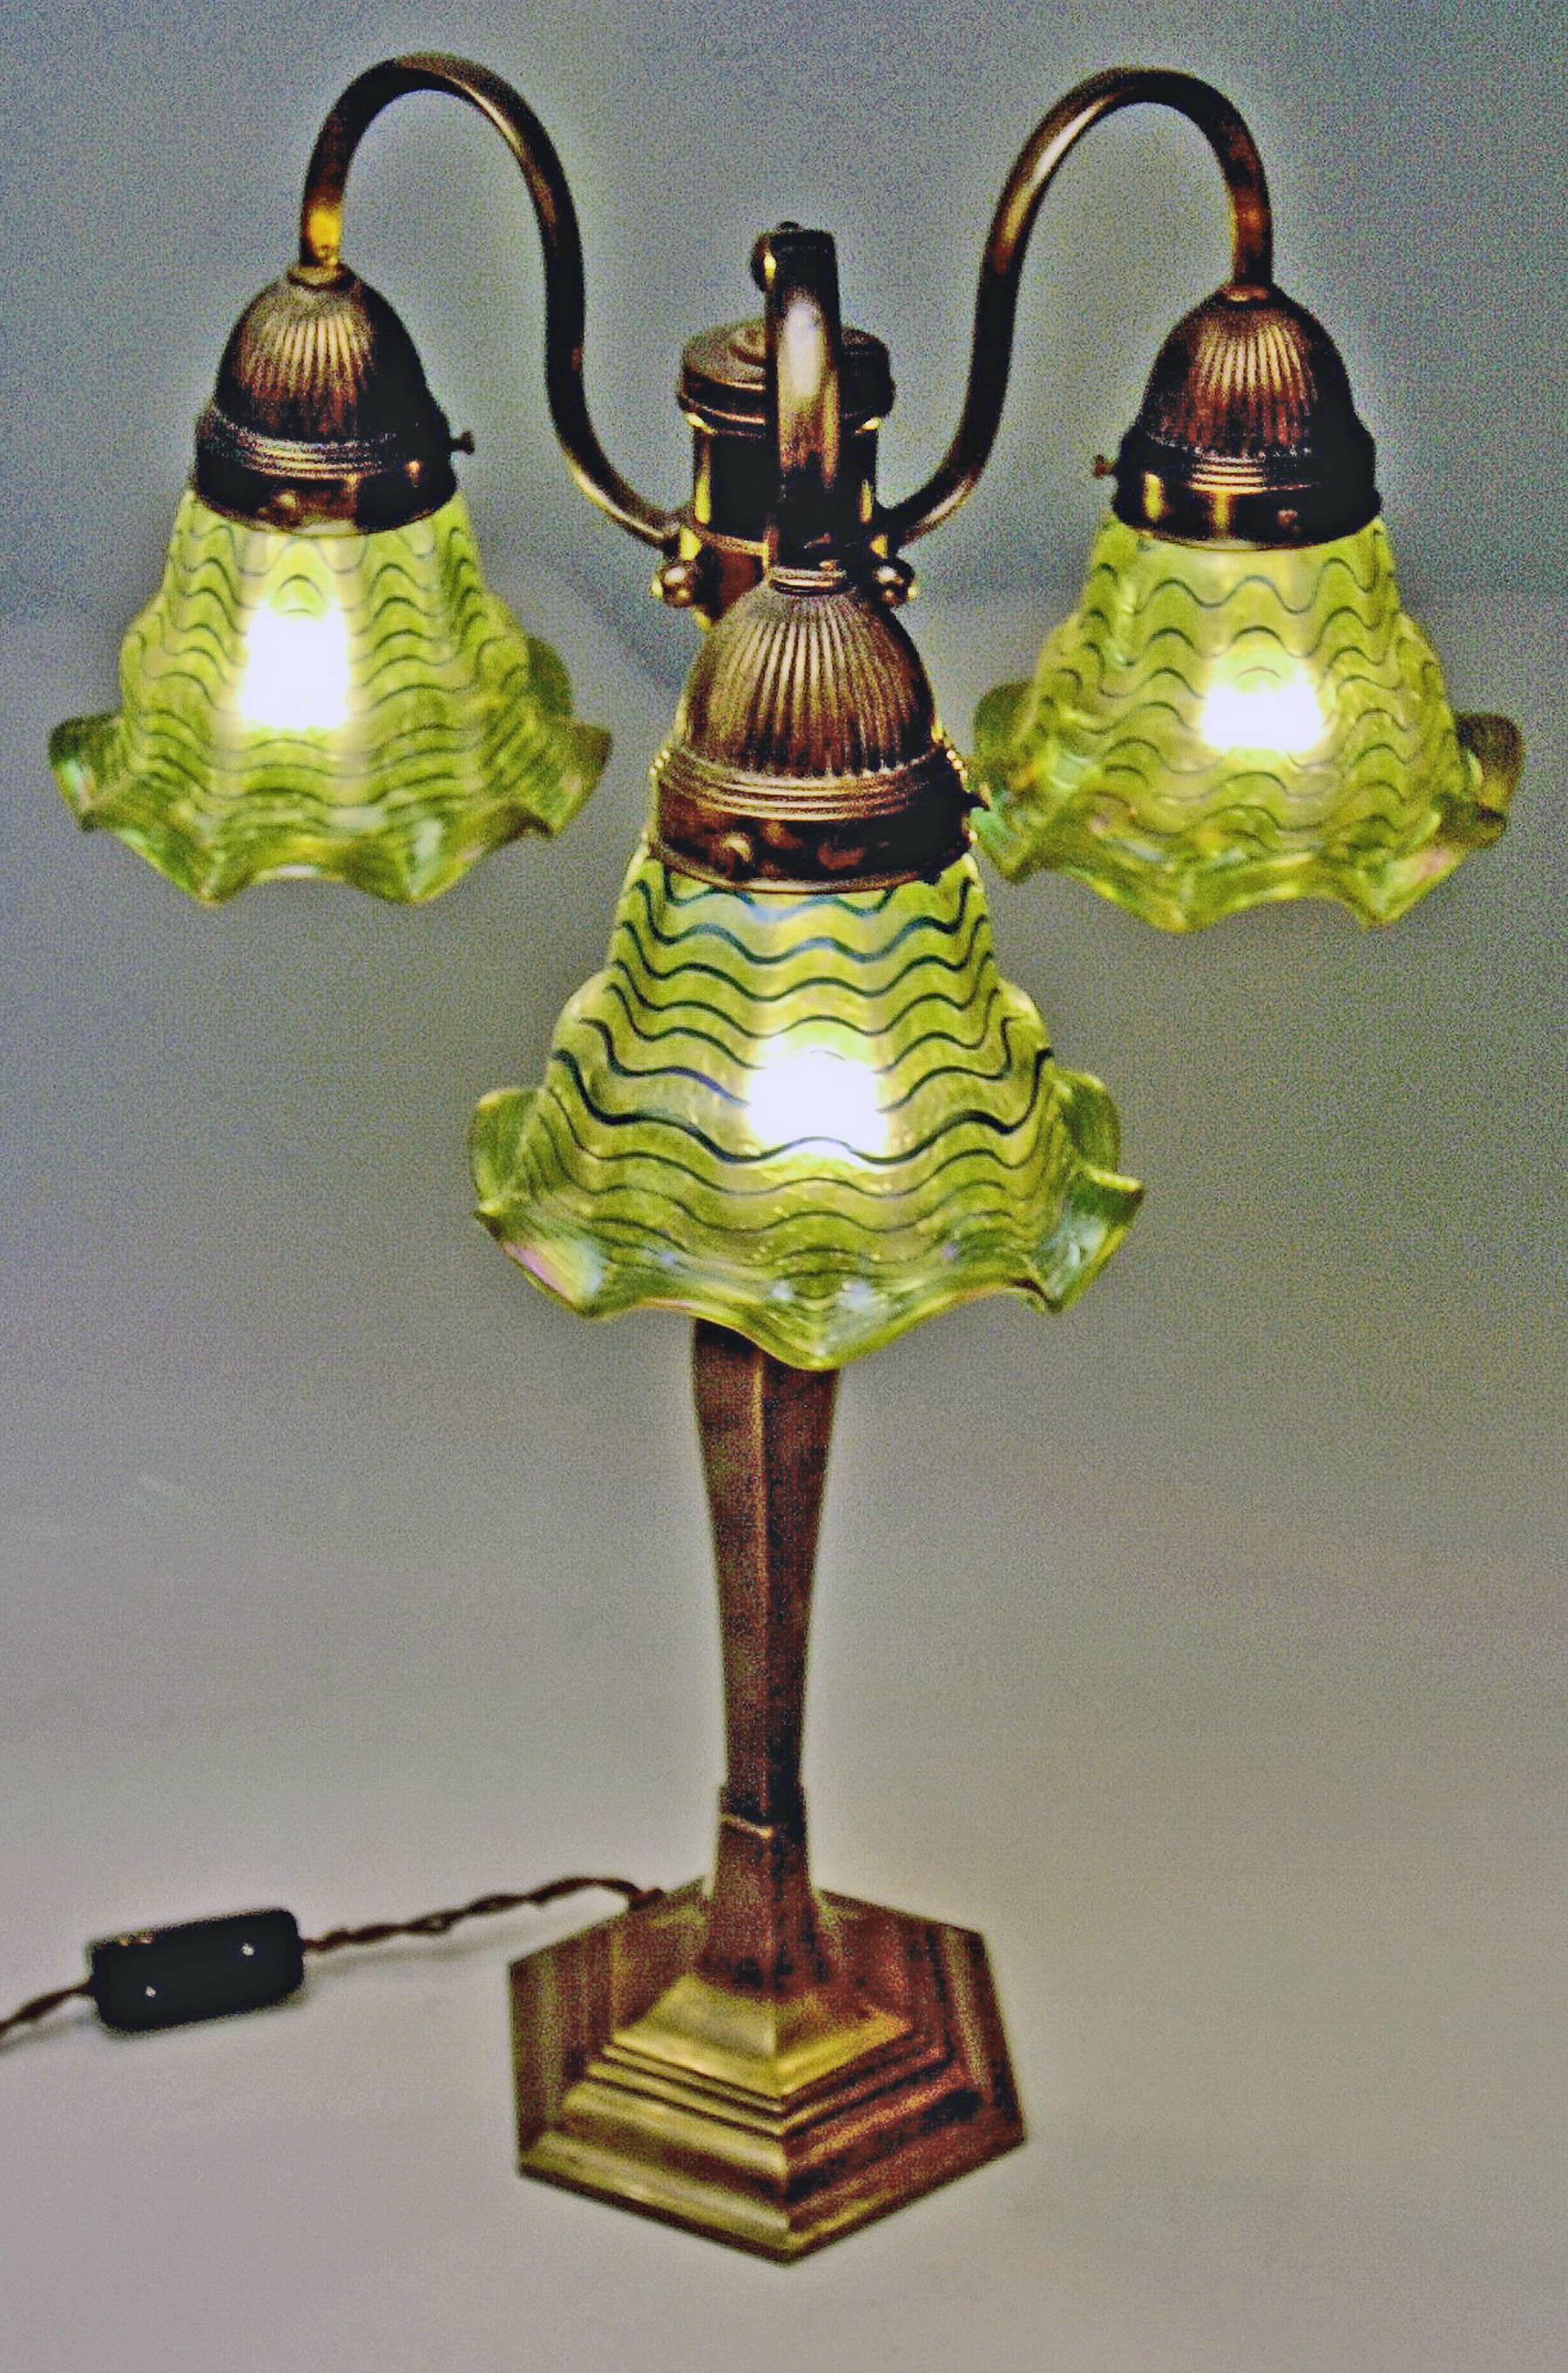 Stunning huge table lamp made of brass, with original glass lampshades.

Made by Pallme Koenig & Habel/glass manufactory Elisabeth* (Bohemia) / made circa 1920.
*Detailed information:
The brothers Josef and Theodor Pallme-Koenig founded together